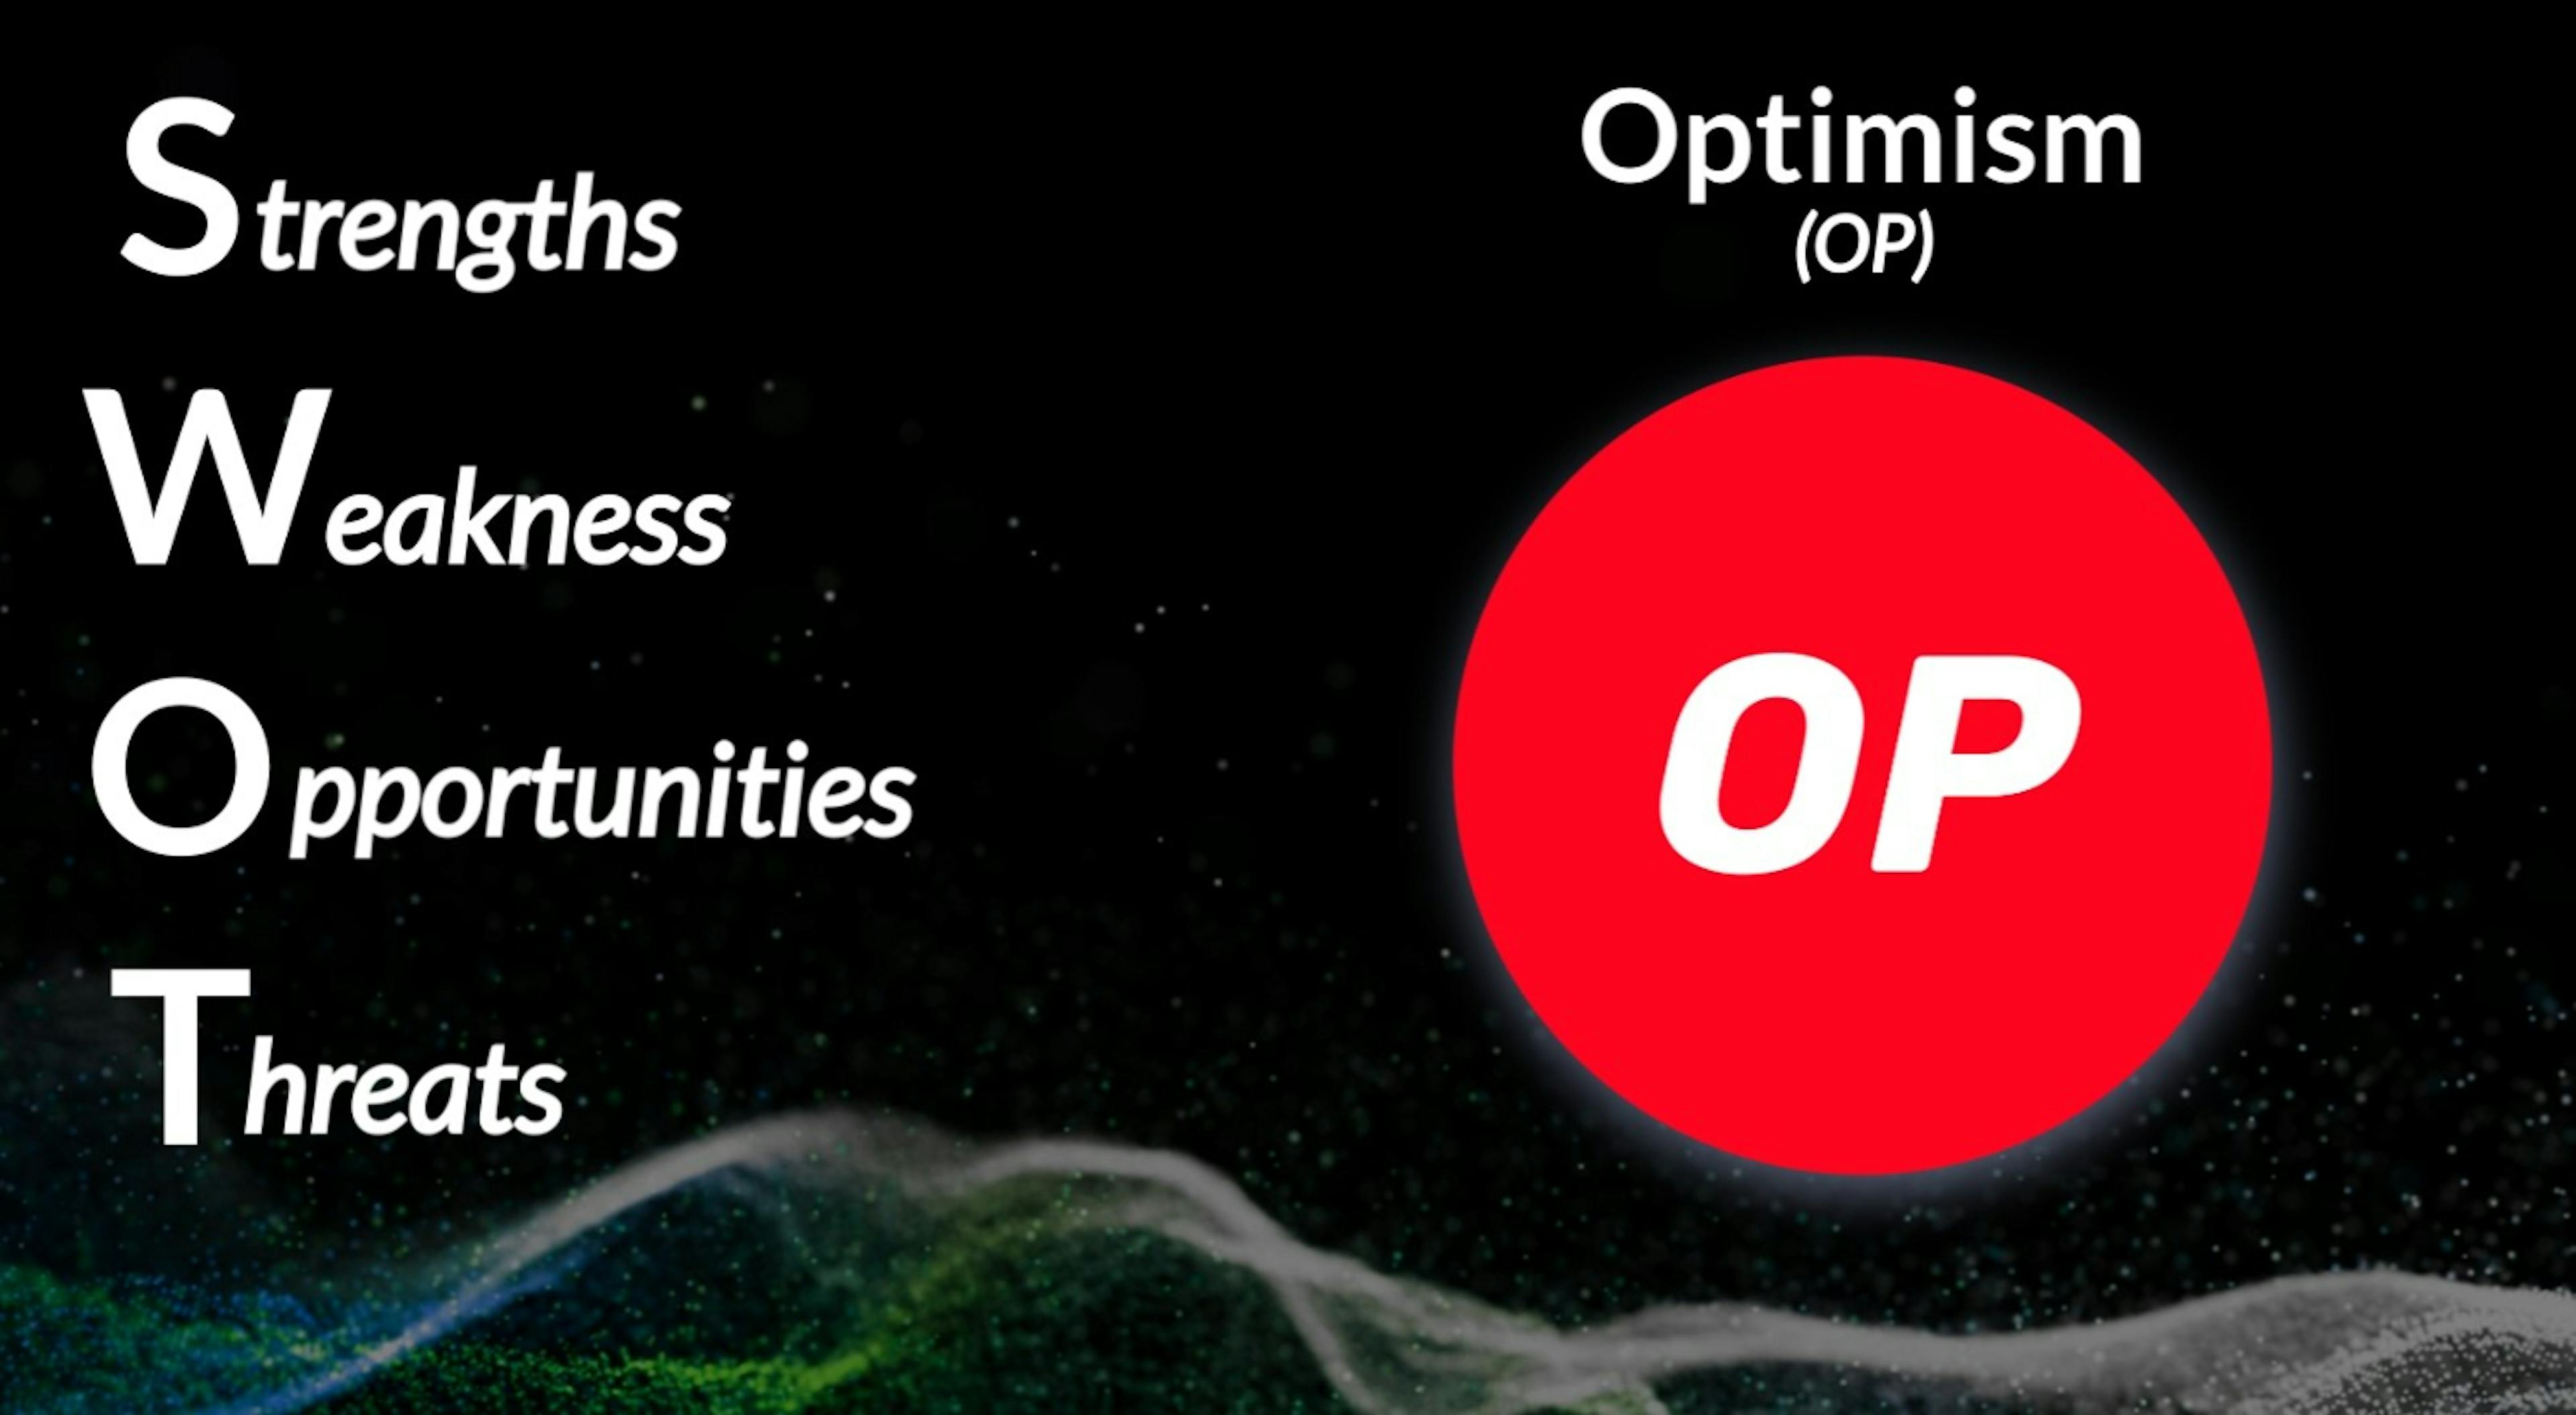 featured image - The Optimism (OP) SWOT Analysis